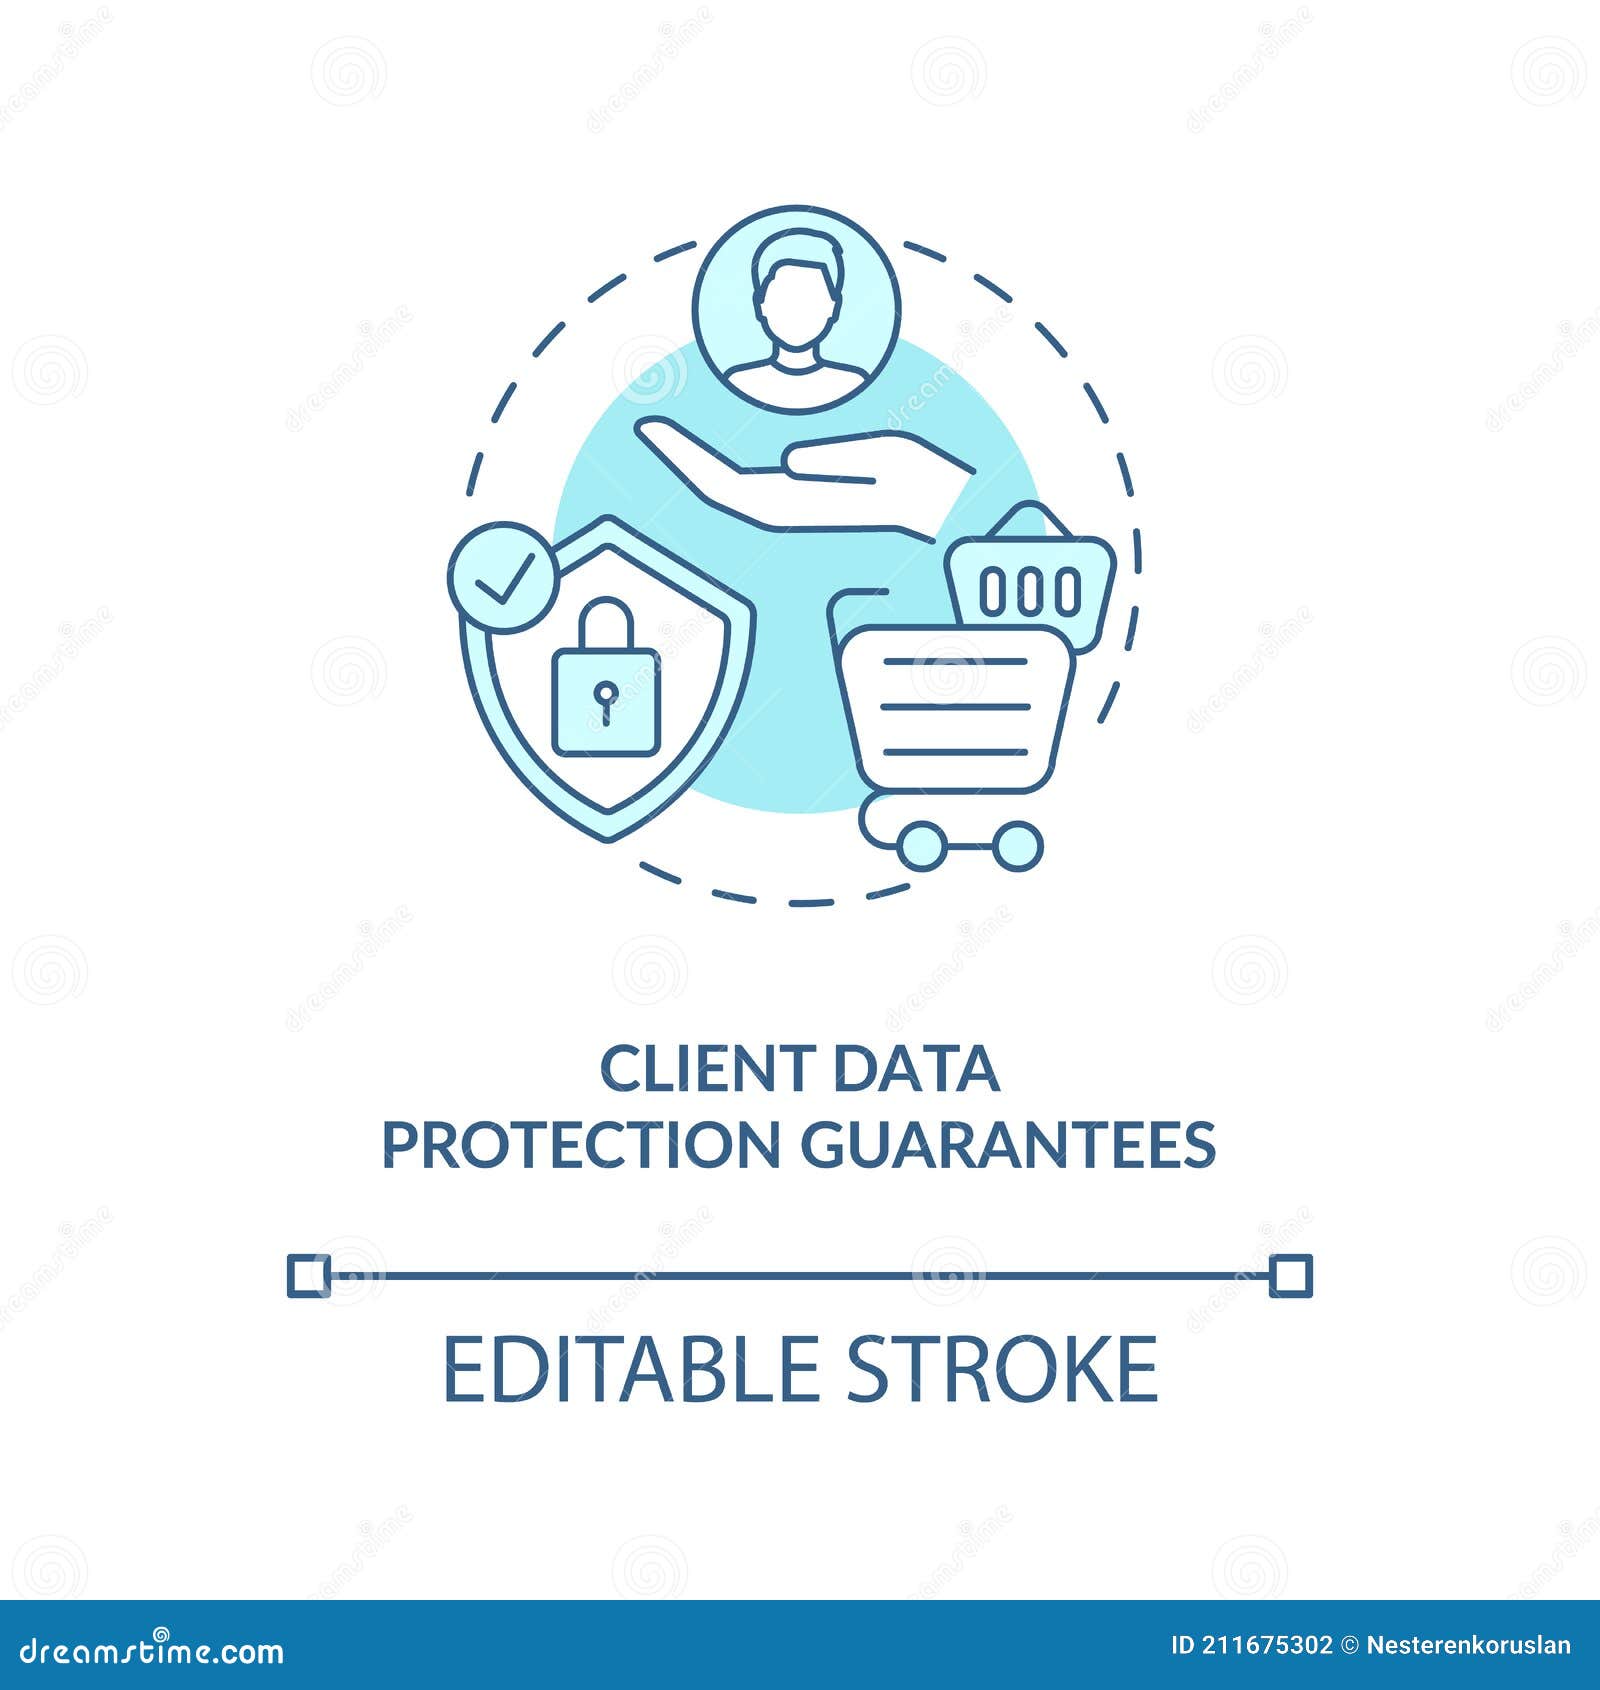 Client Data Protection Guarantees Concept Icon Stock Vector - Illustration  of pandemic, protect: 211675302